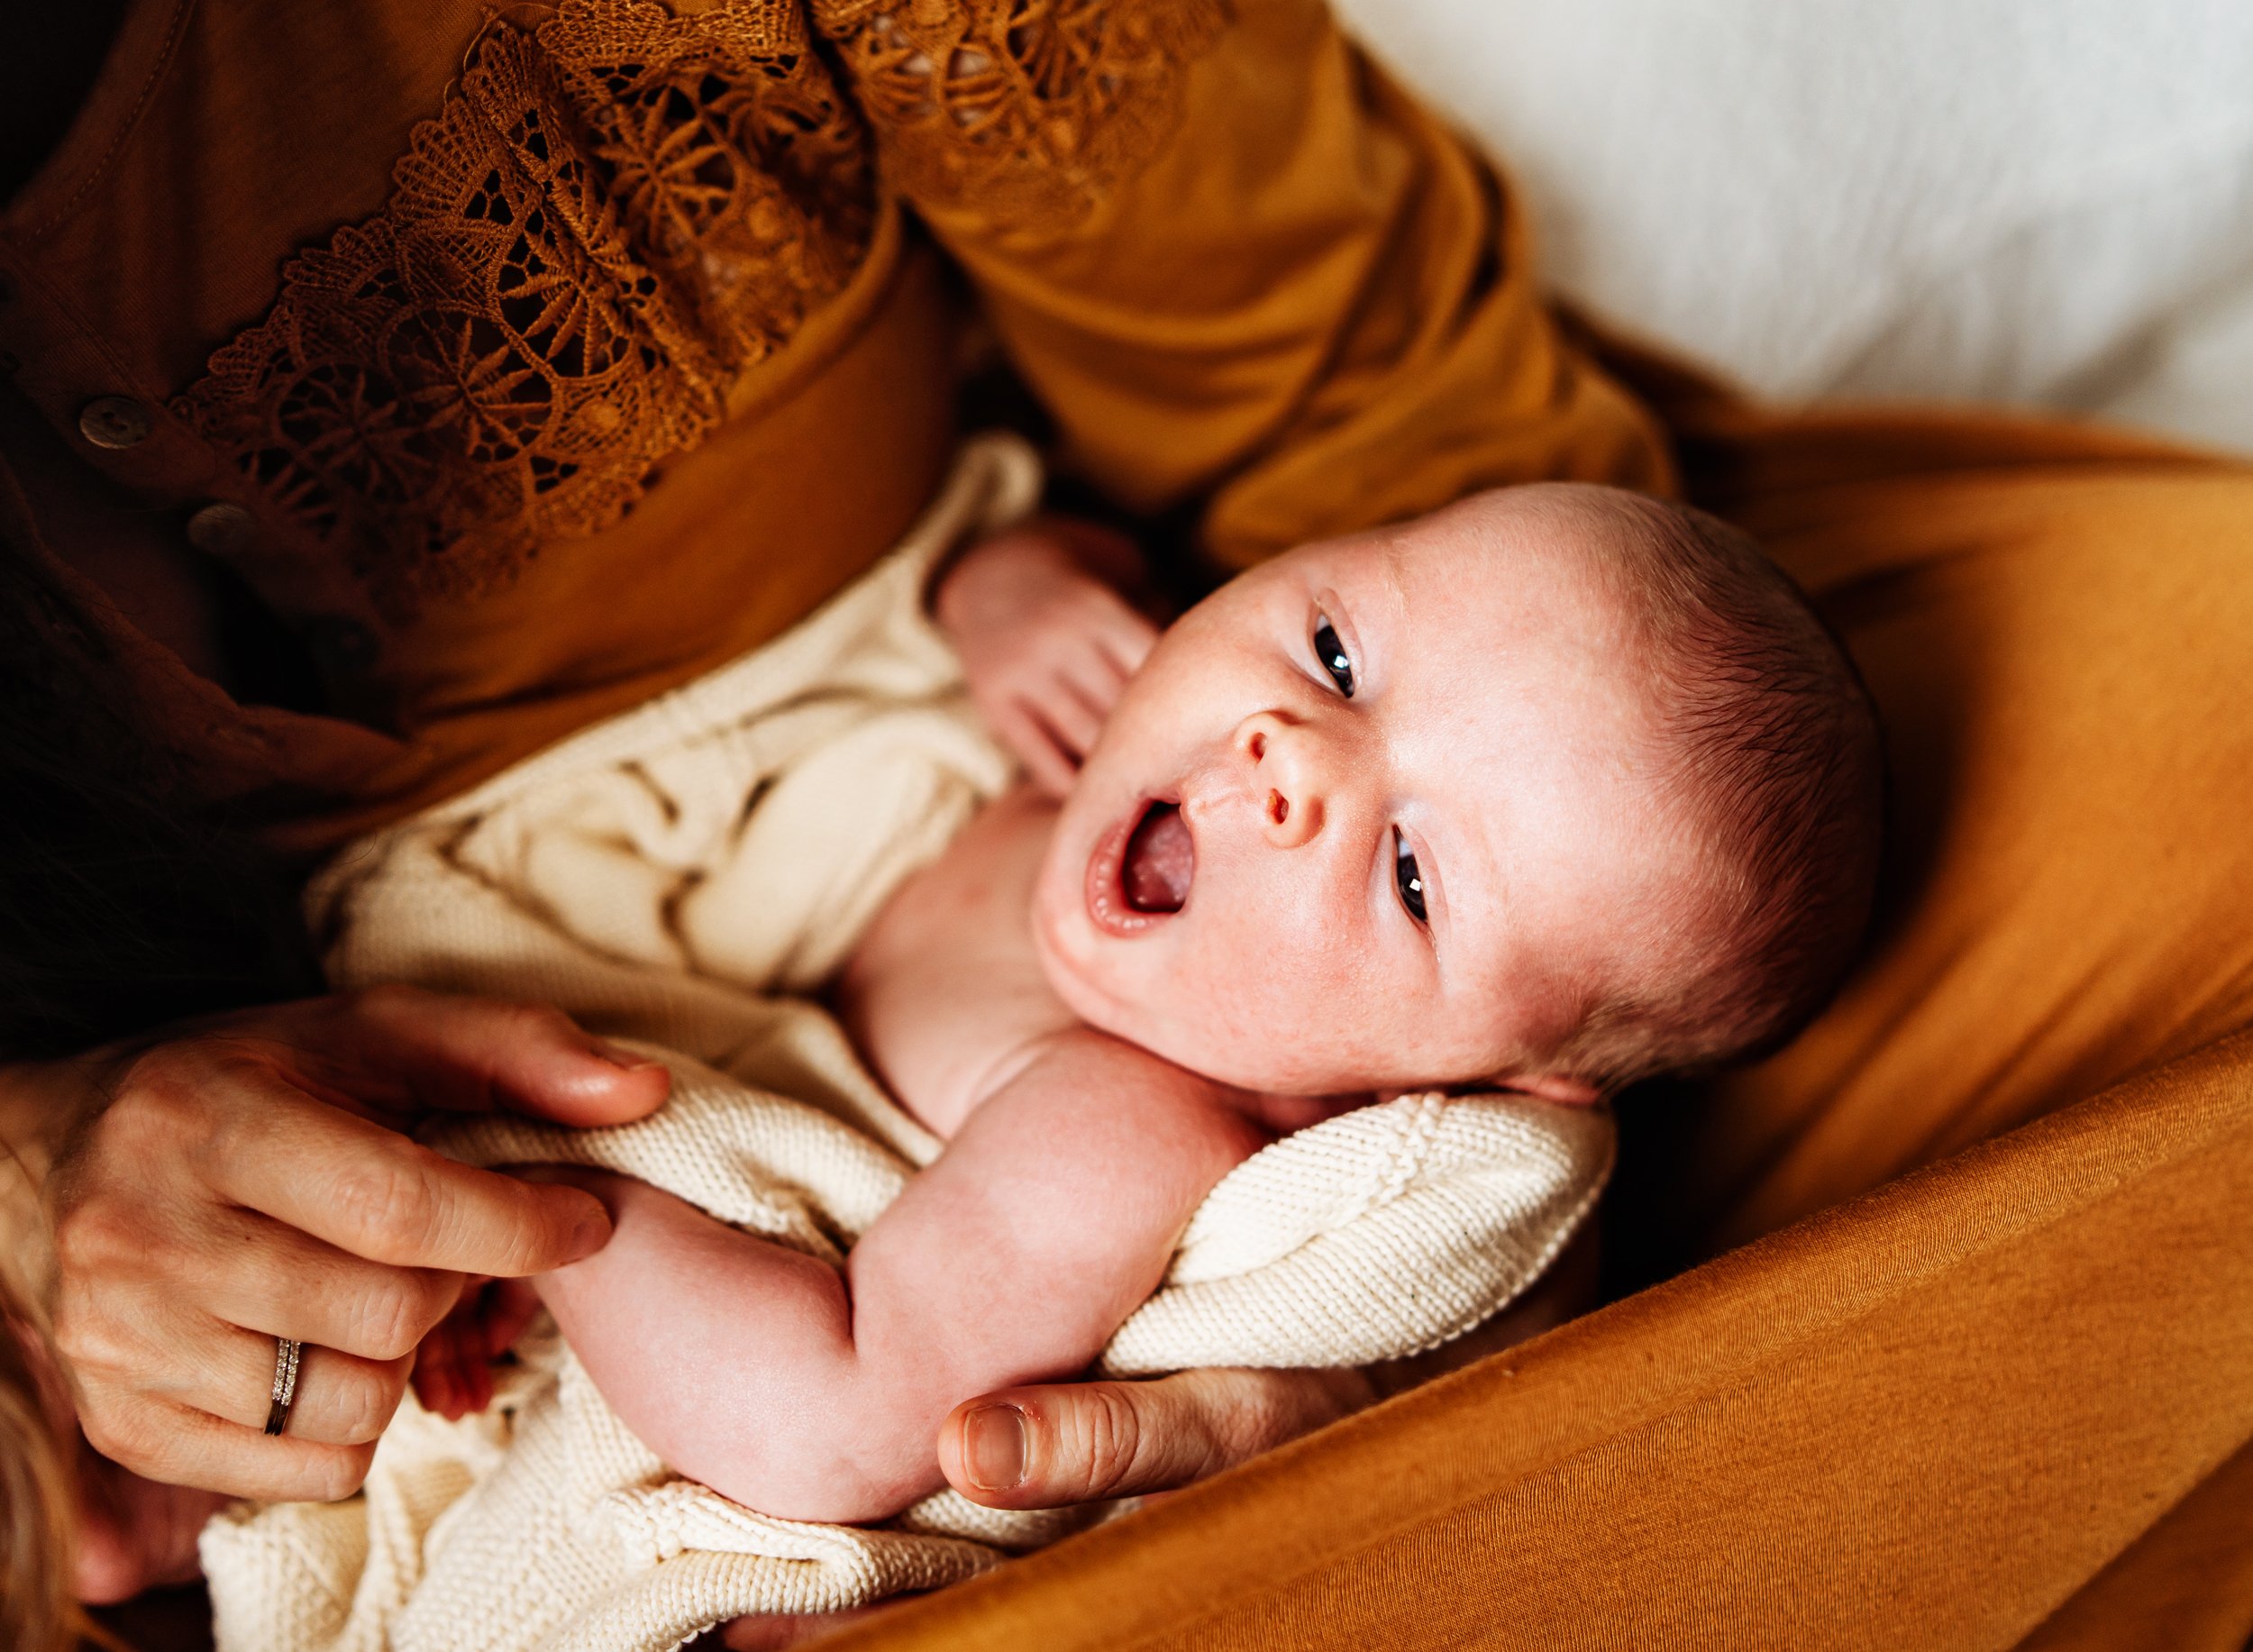 in-home-lifestyle-family-and-newborn-photo-session-in-ramstein-germany (10).jpg